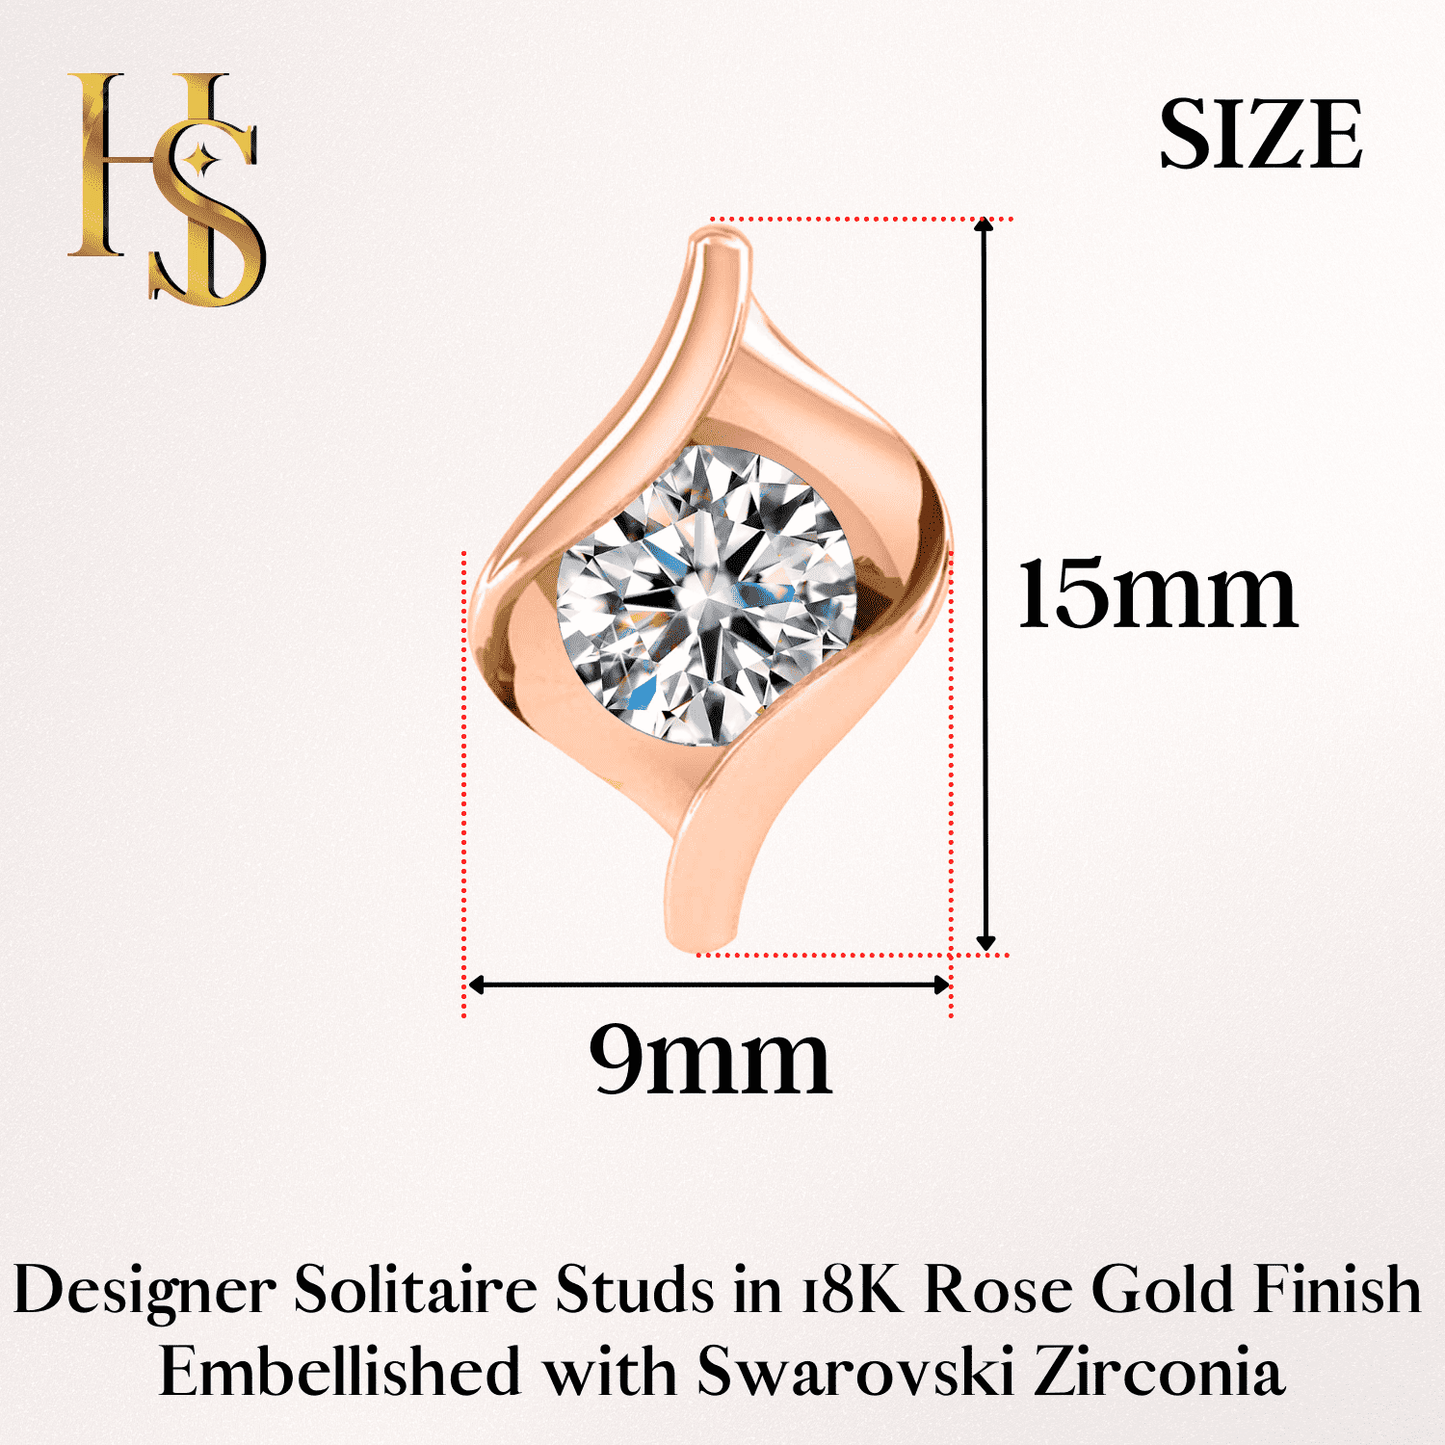 Rose Gold Designer Solitaire Earrings in 92.5 Silver embellished with Swarovski Zirconia - 92.5 Silver in 18K Rose Gold Finish